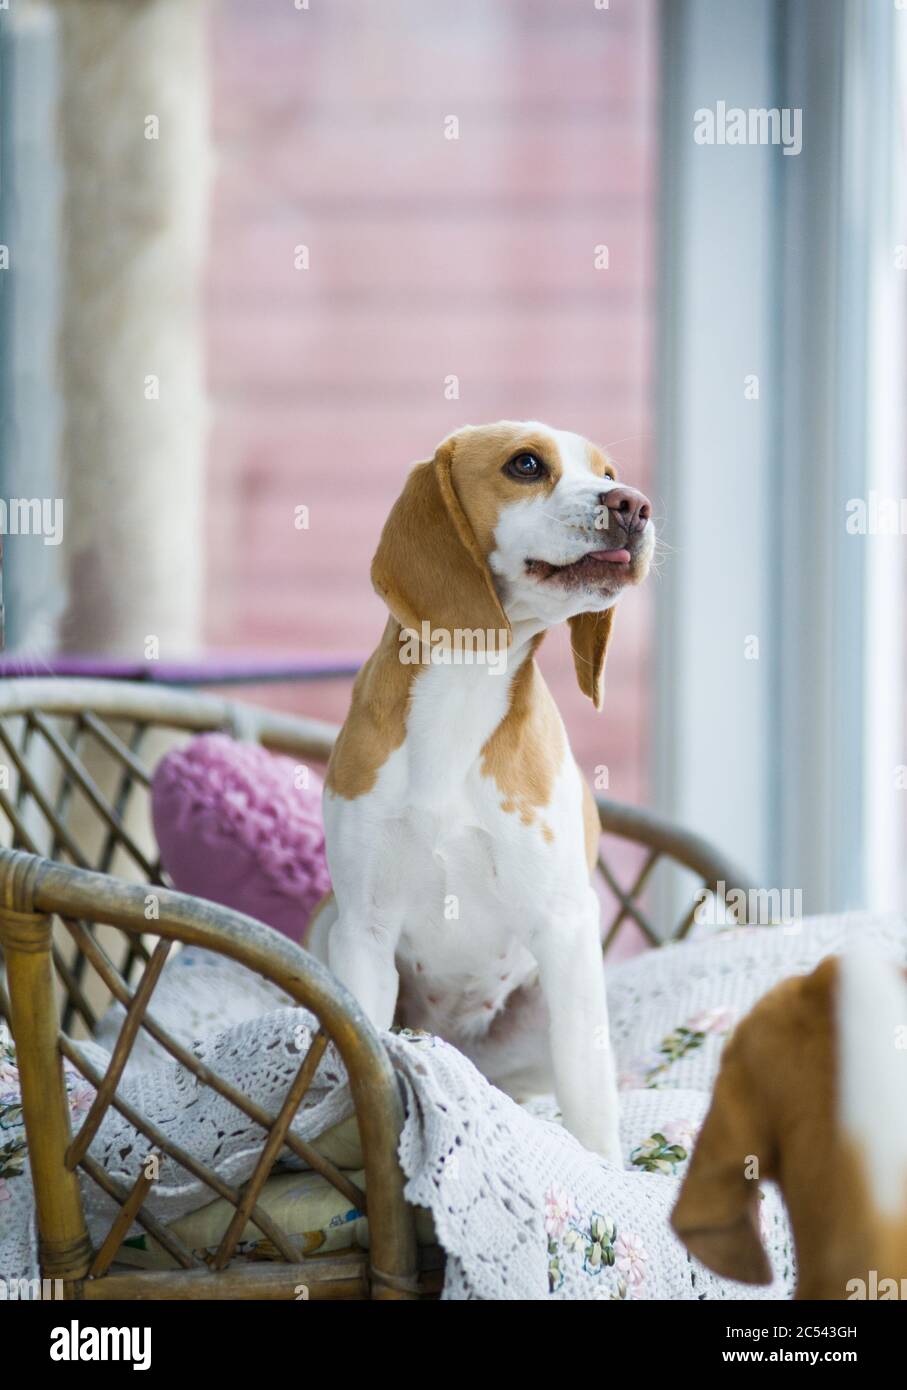 Cute english beagle dog in old cozy chair indoors. Pet in house. Purebred dog Stock Photo